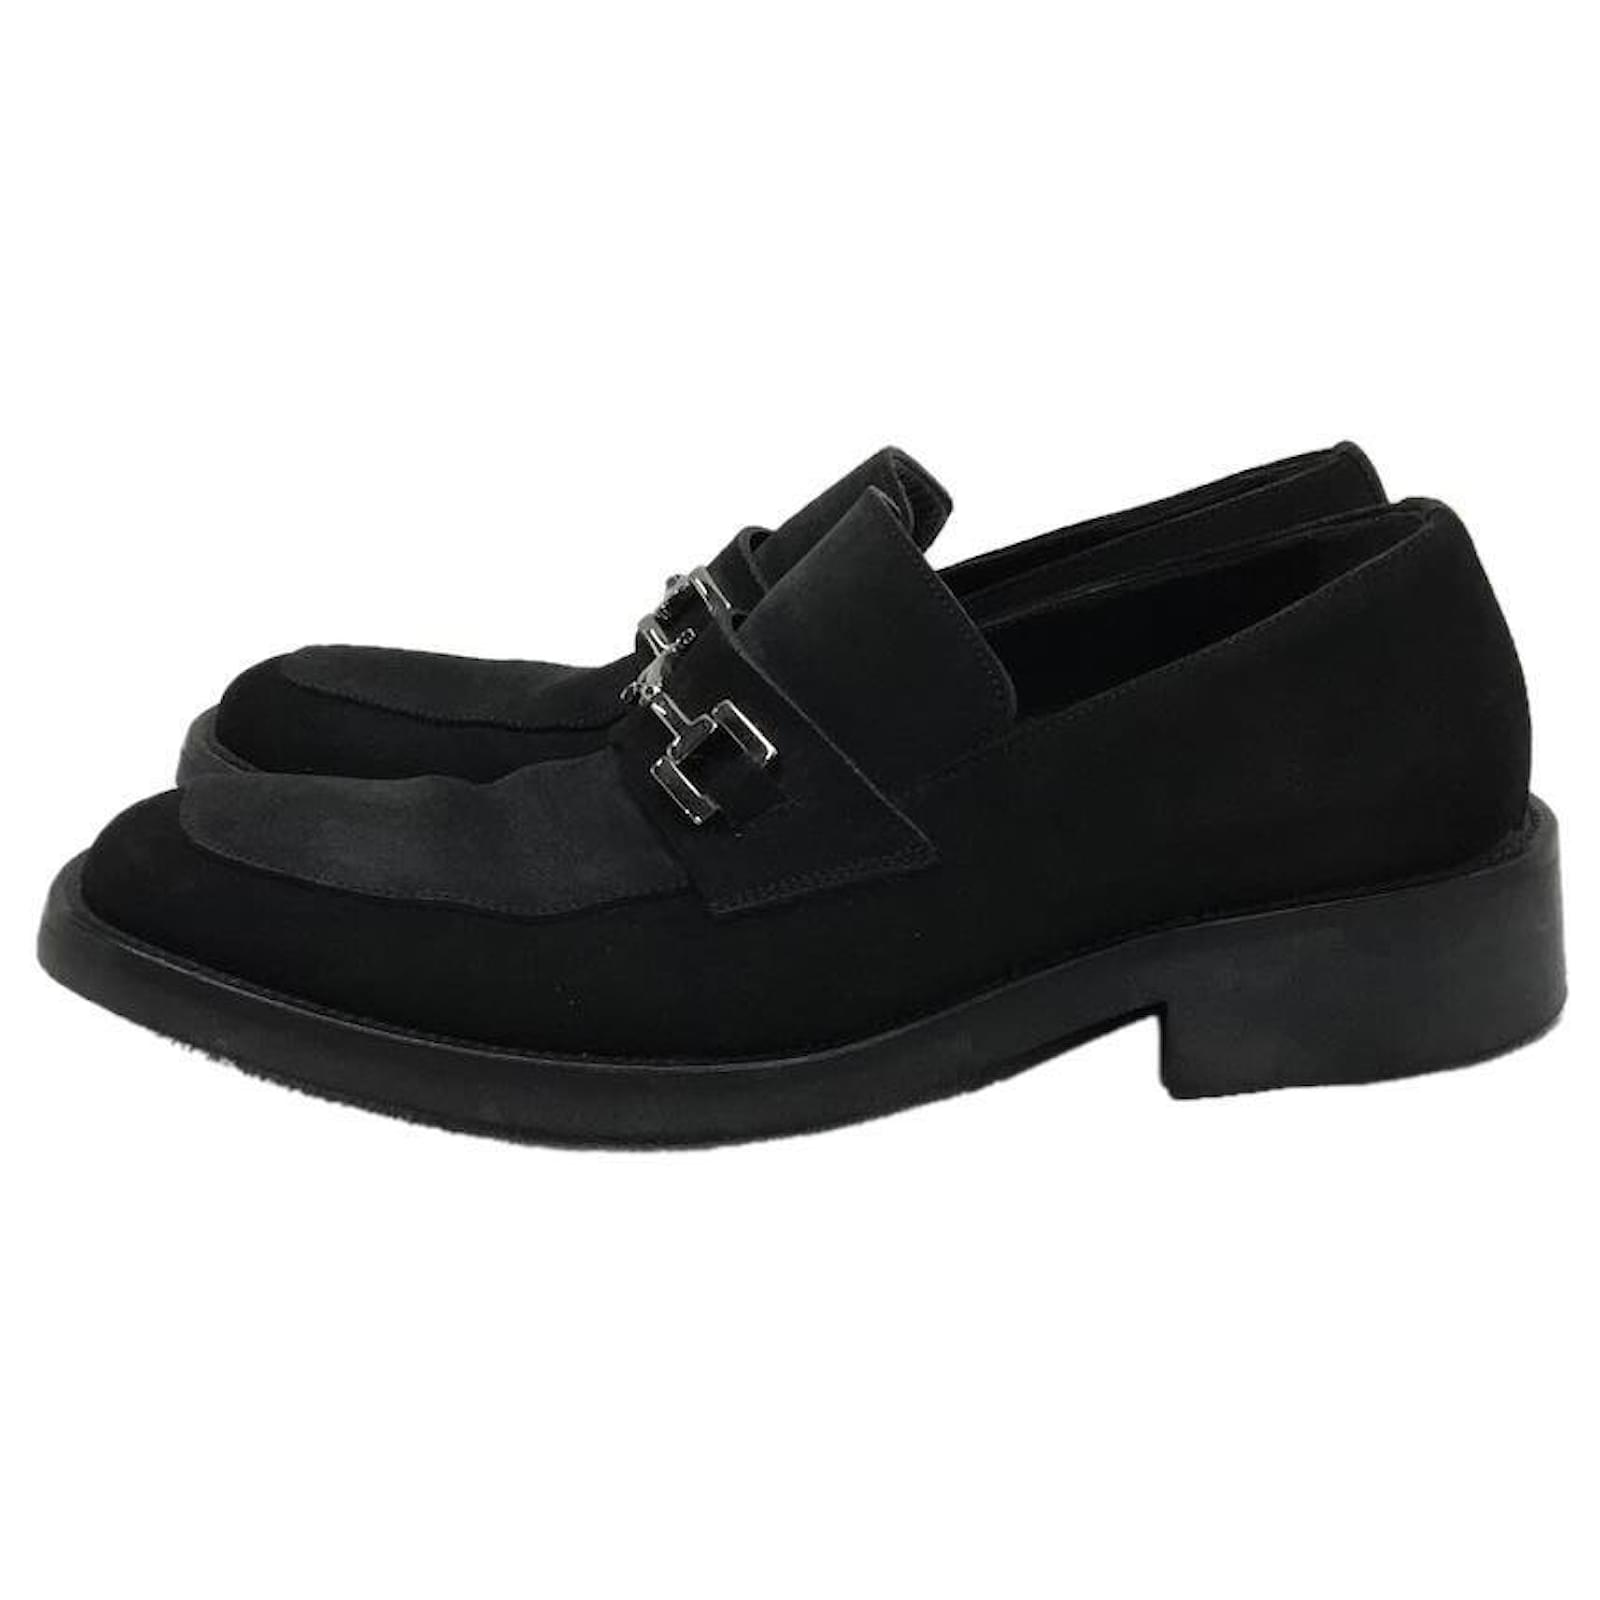 GUCCI Bit loafers / square toe / loafers / 40.5 / BLK / Suede Black ref ...